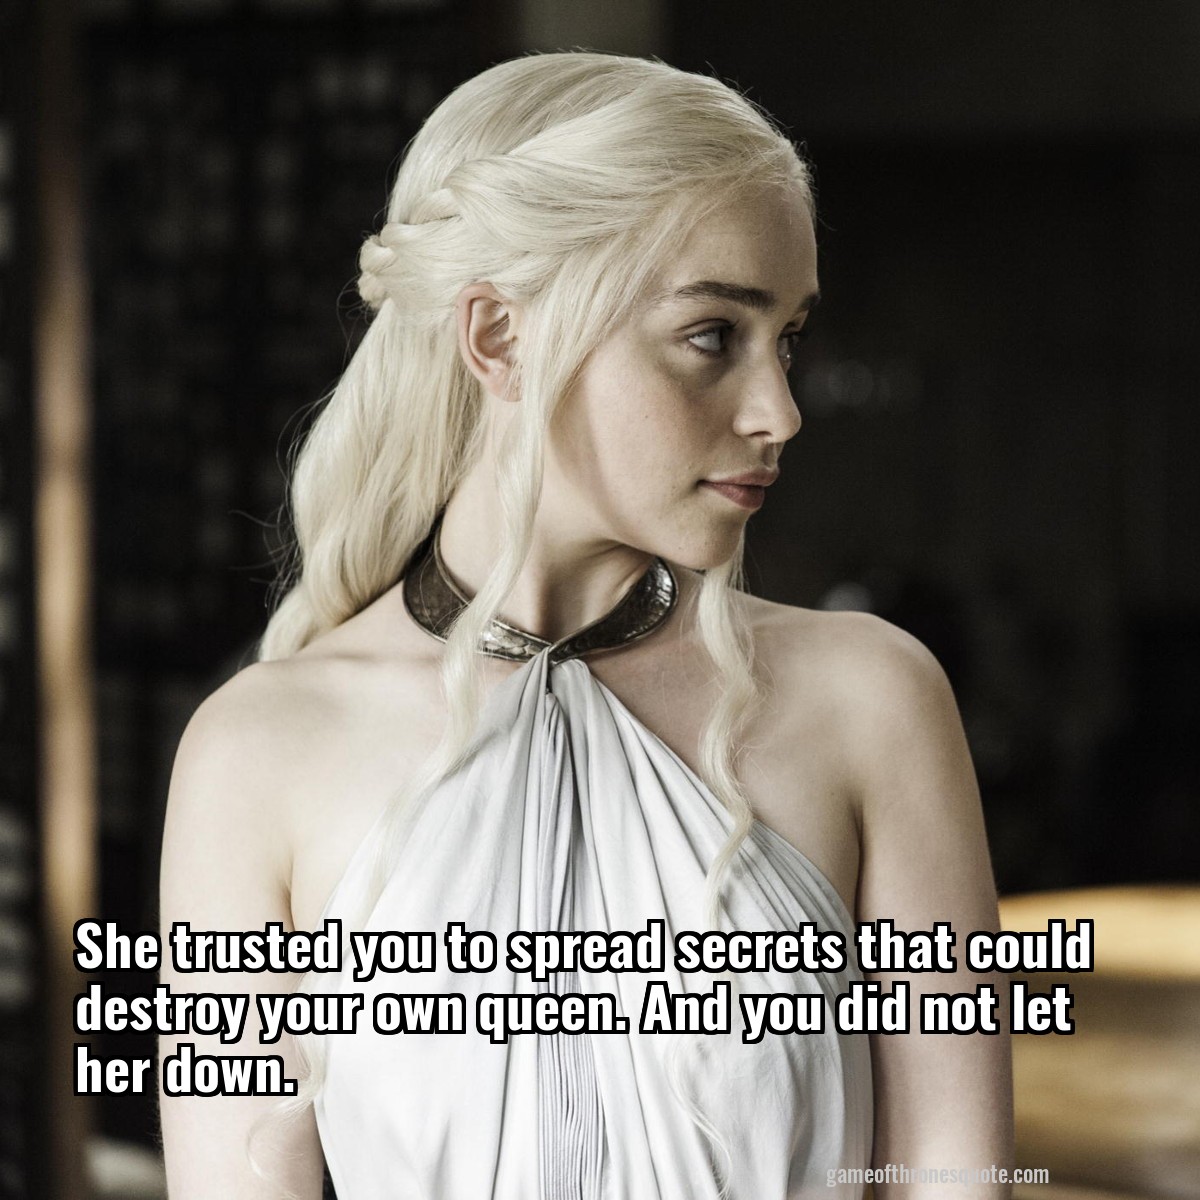 She trusted you to spread secrets that could destroy your own queen. And you did not let her down.